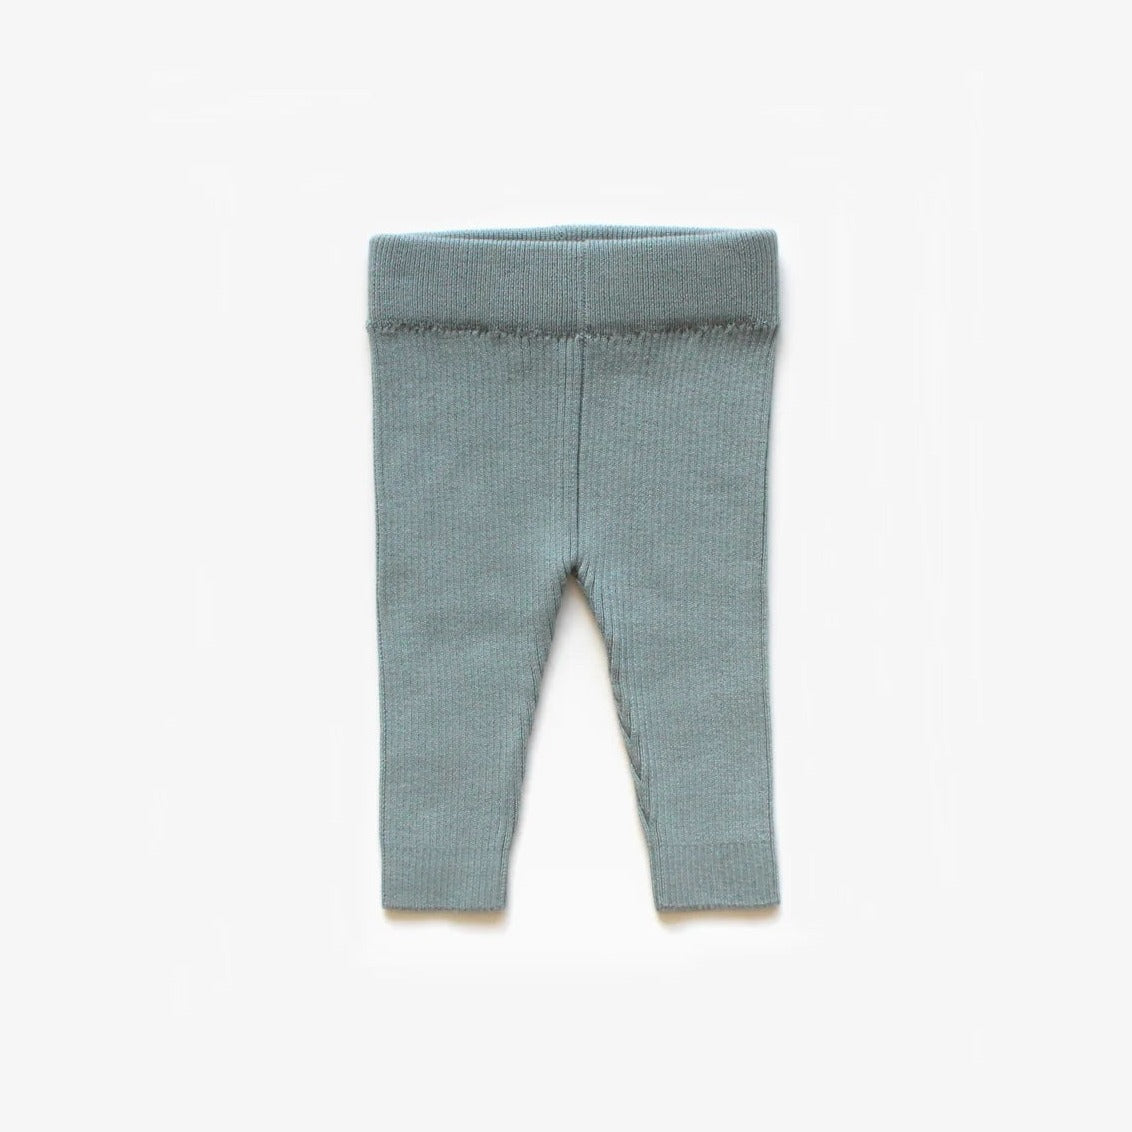 knit baby leggings - angus and dudley